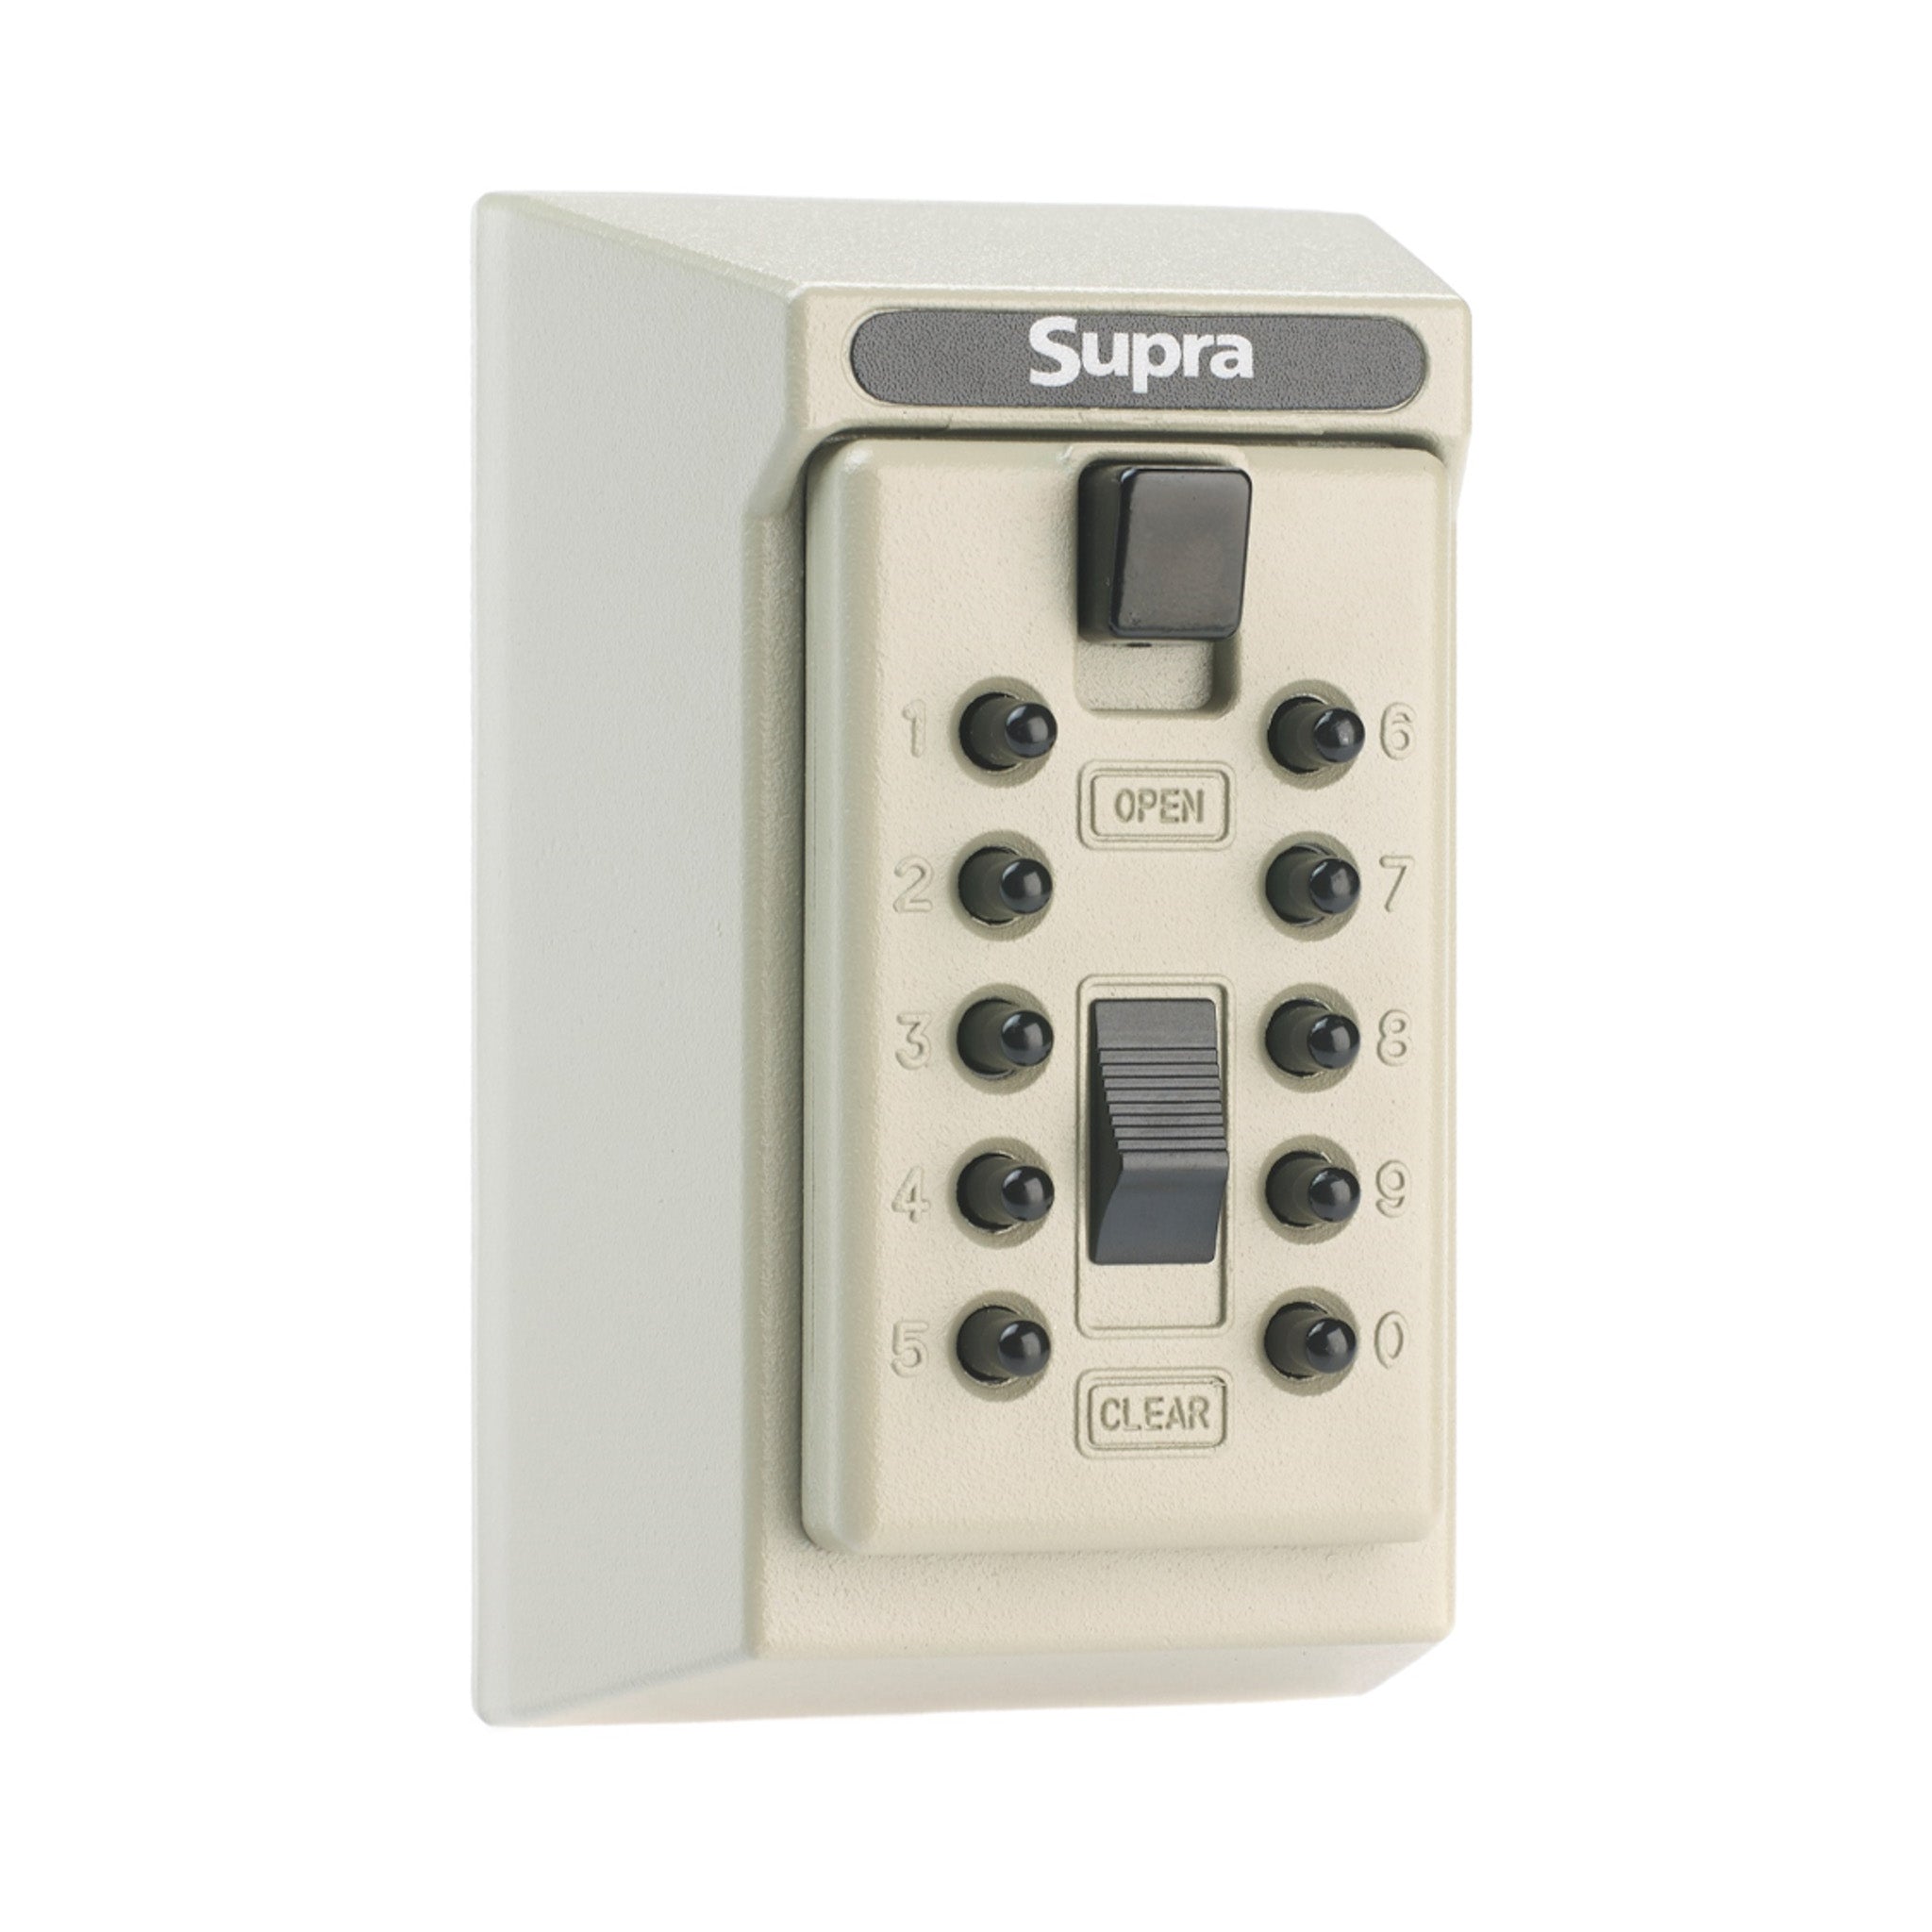 Closed Supra S5 permanent key safe made from zinc alloy